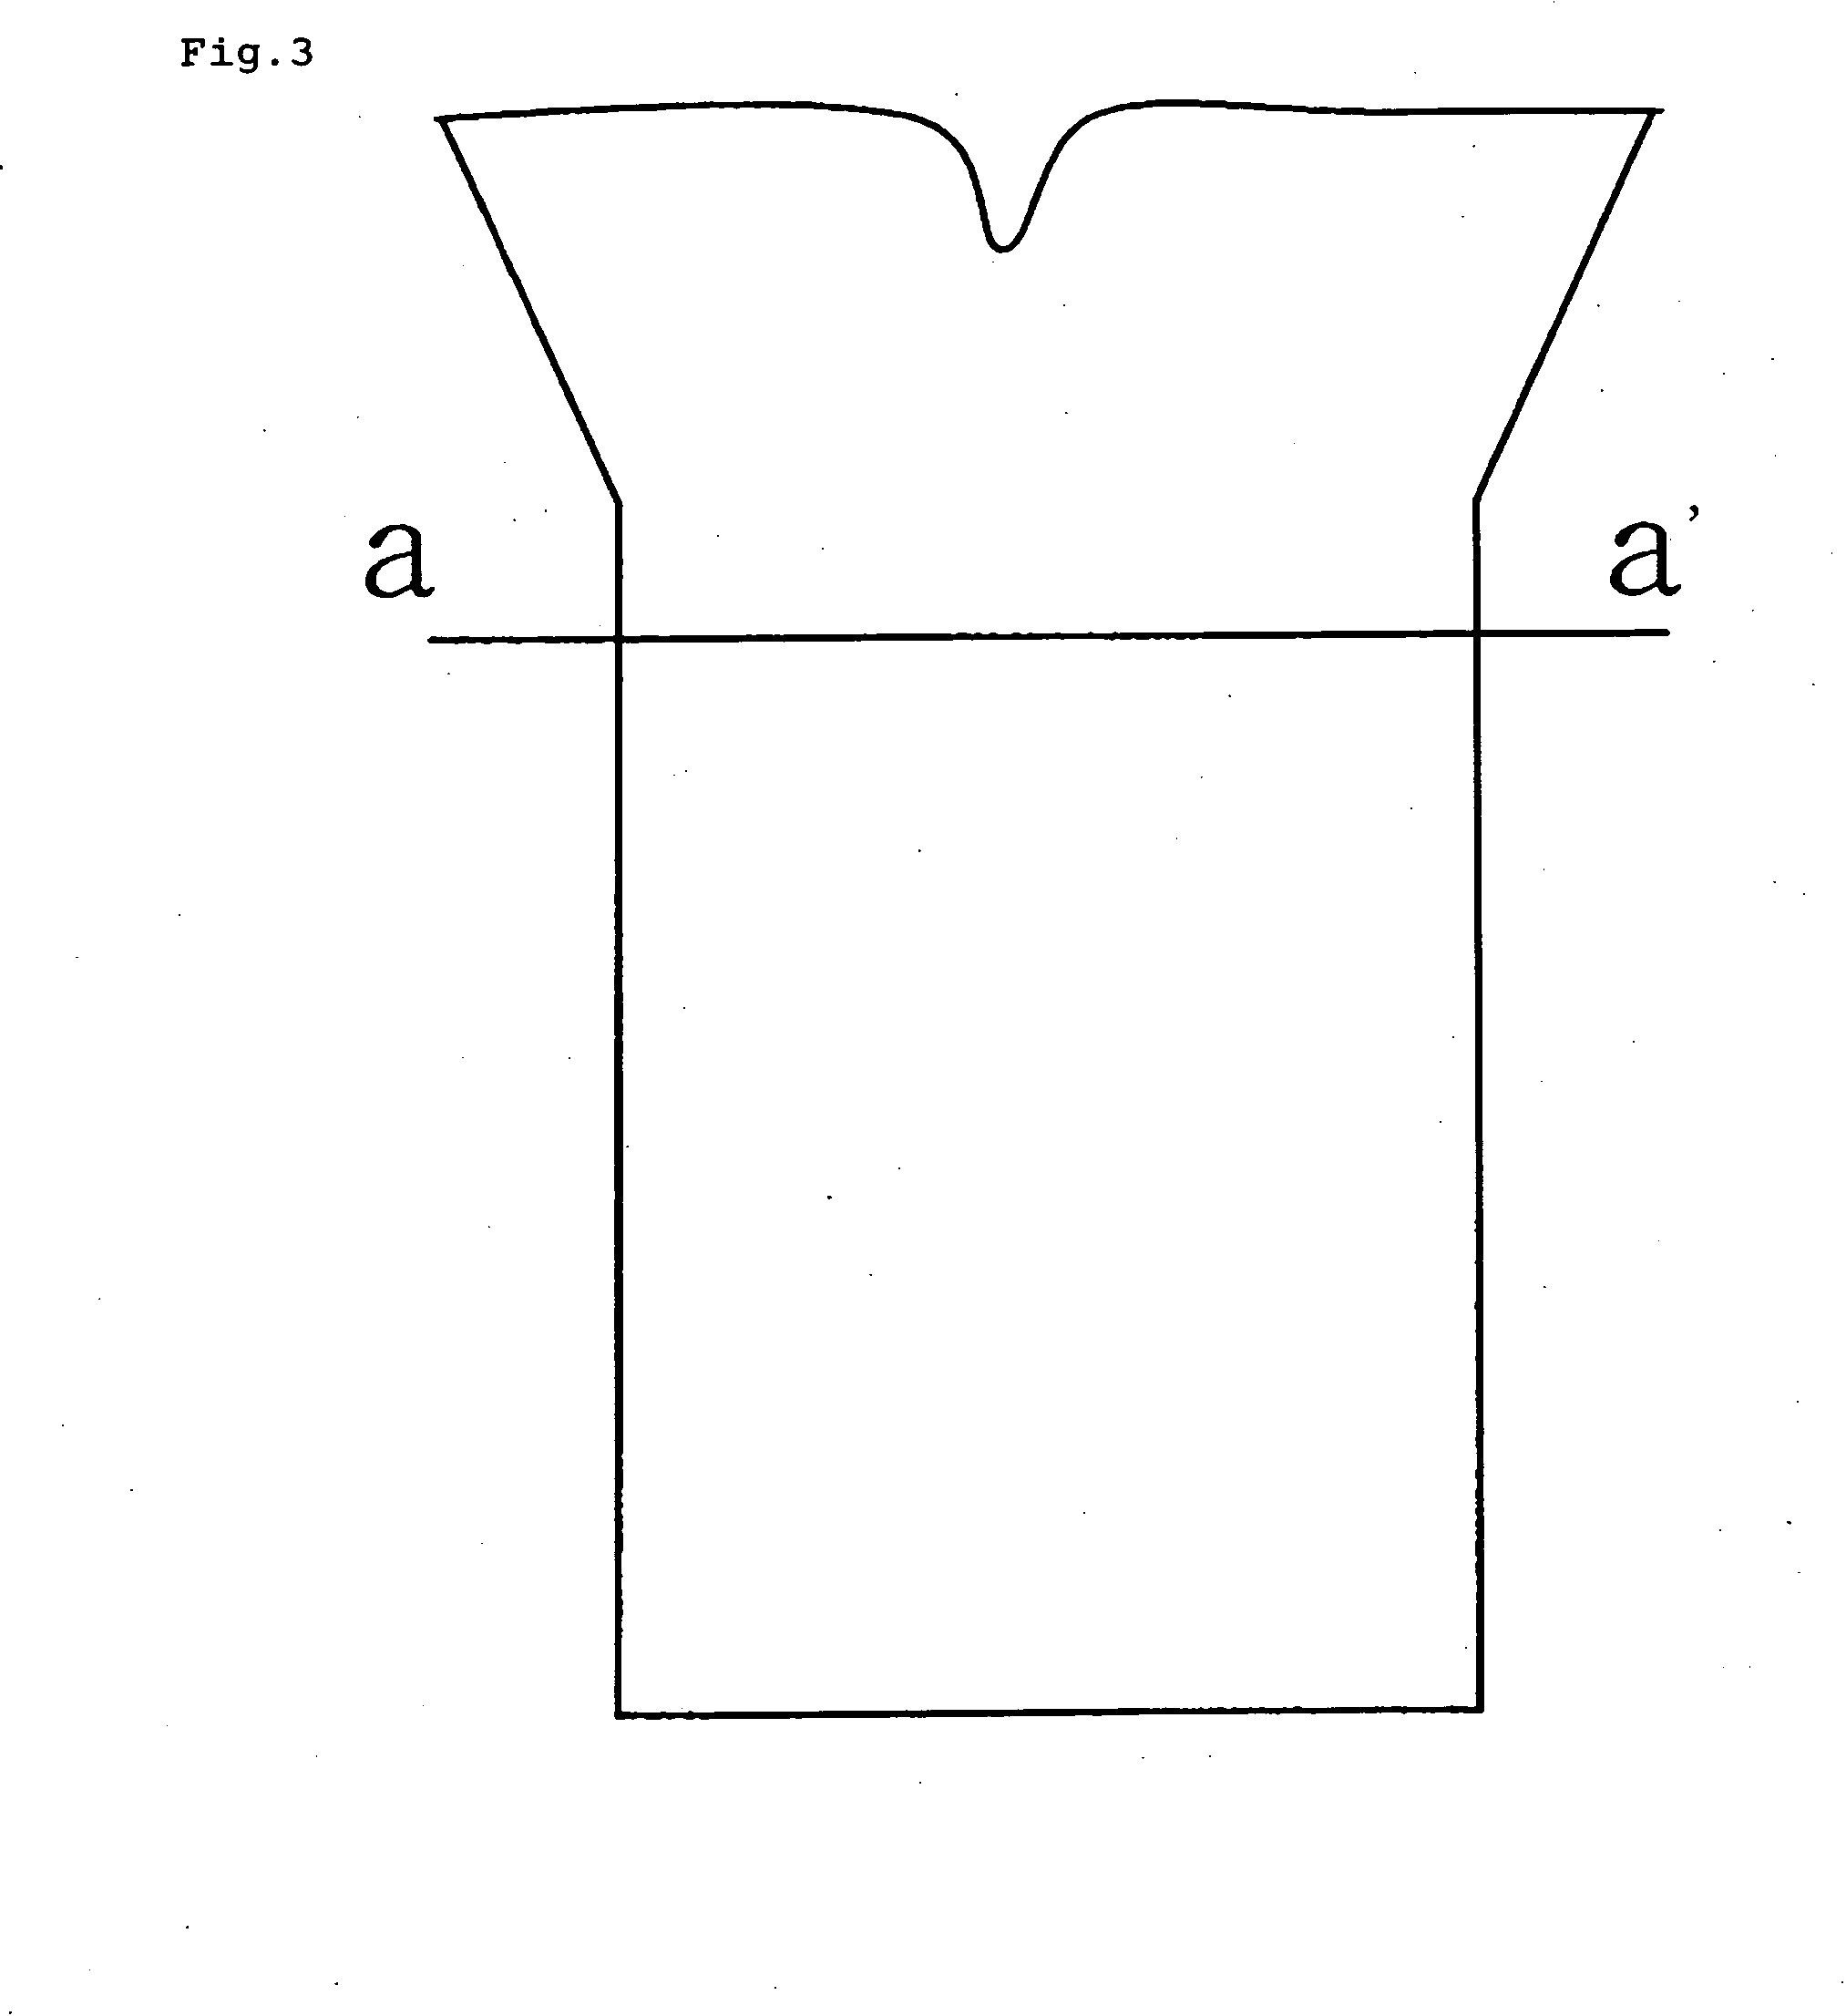 Silver alloy, sputtering target material thereof, and thin film thereof